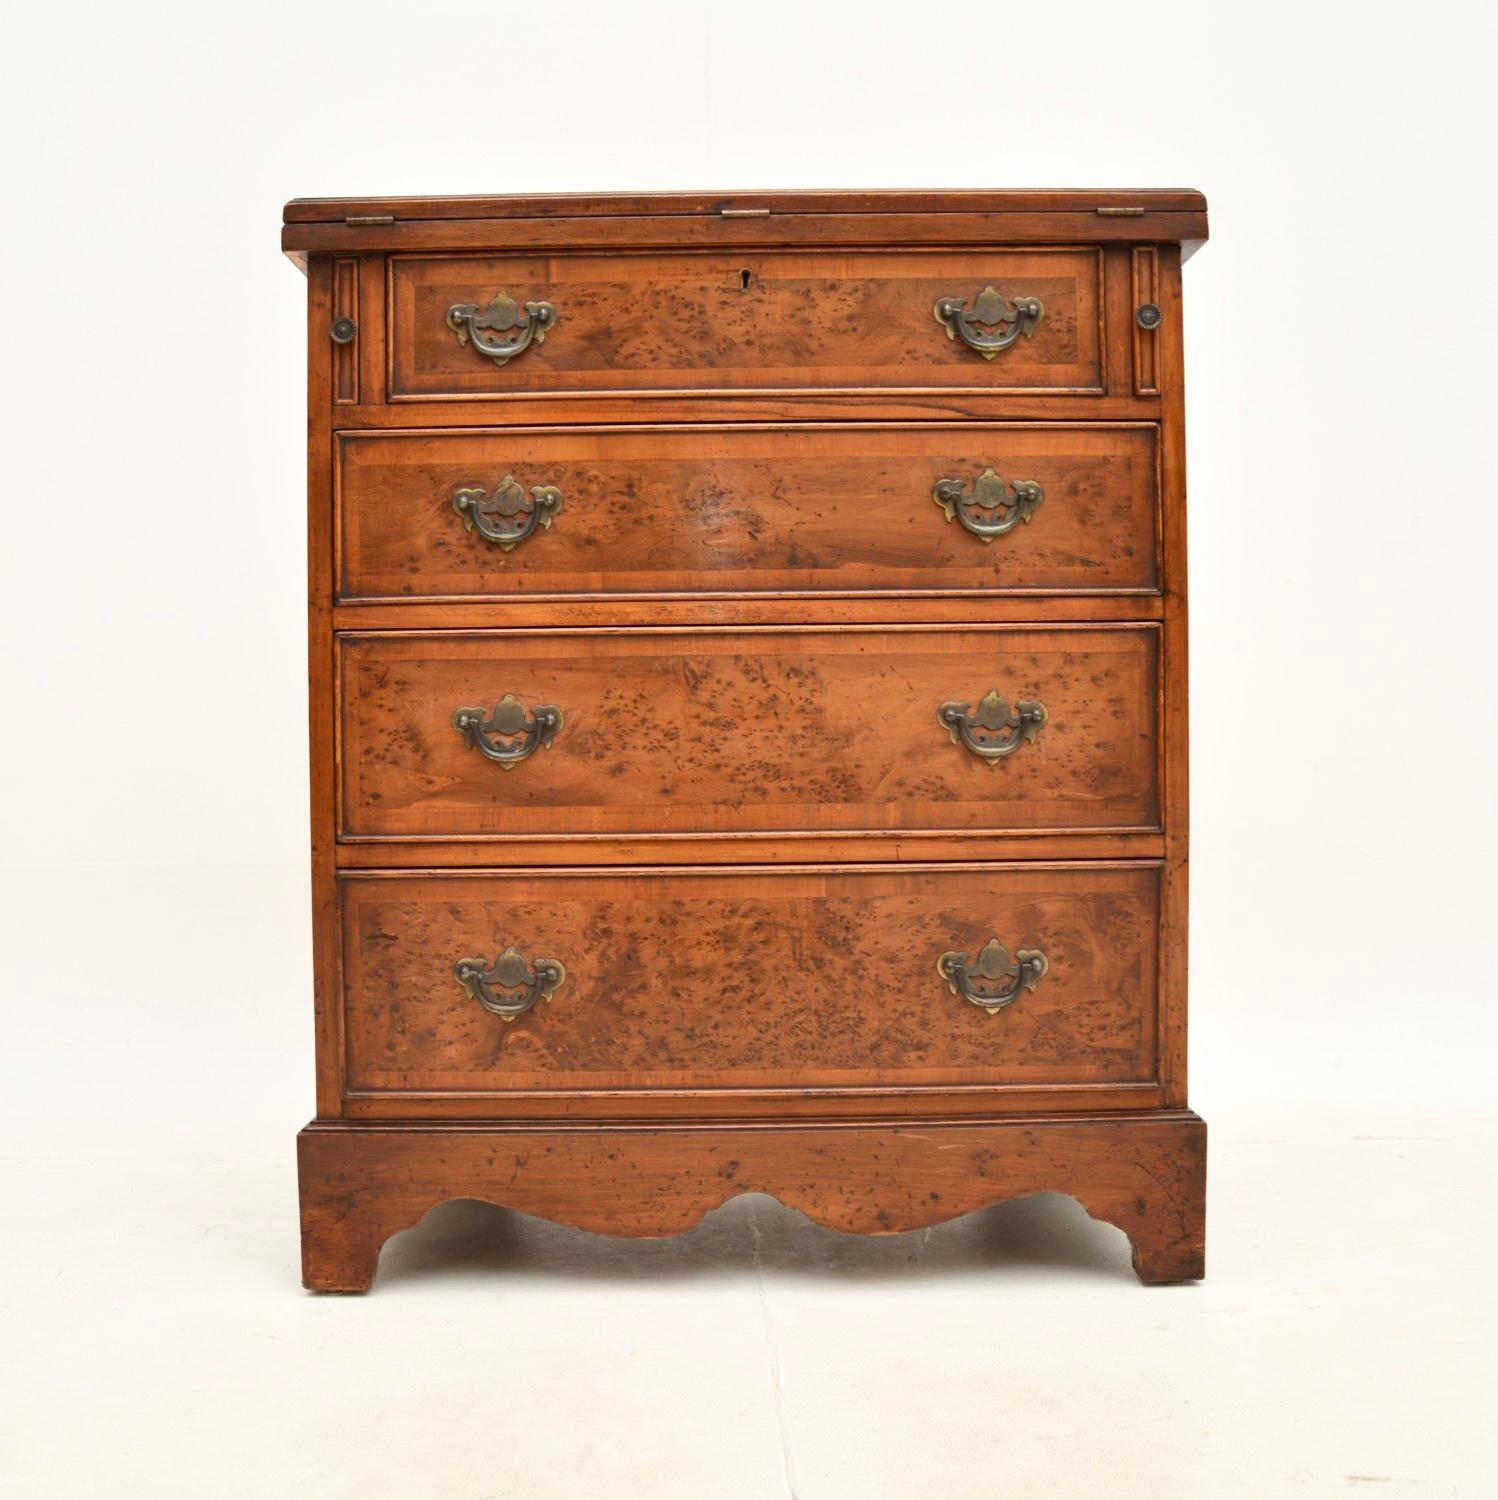 A stunning antique yew wood bachelors chest of drawers. This was made in England in the Georgian revival style, it dates from around the 1920’s period.

The quality is outstanding and this has a very useful design. It it fairly small and compact,